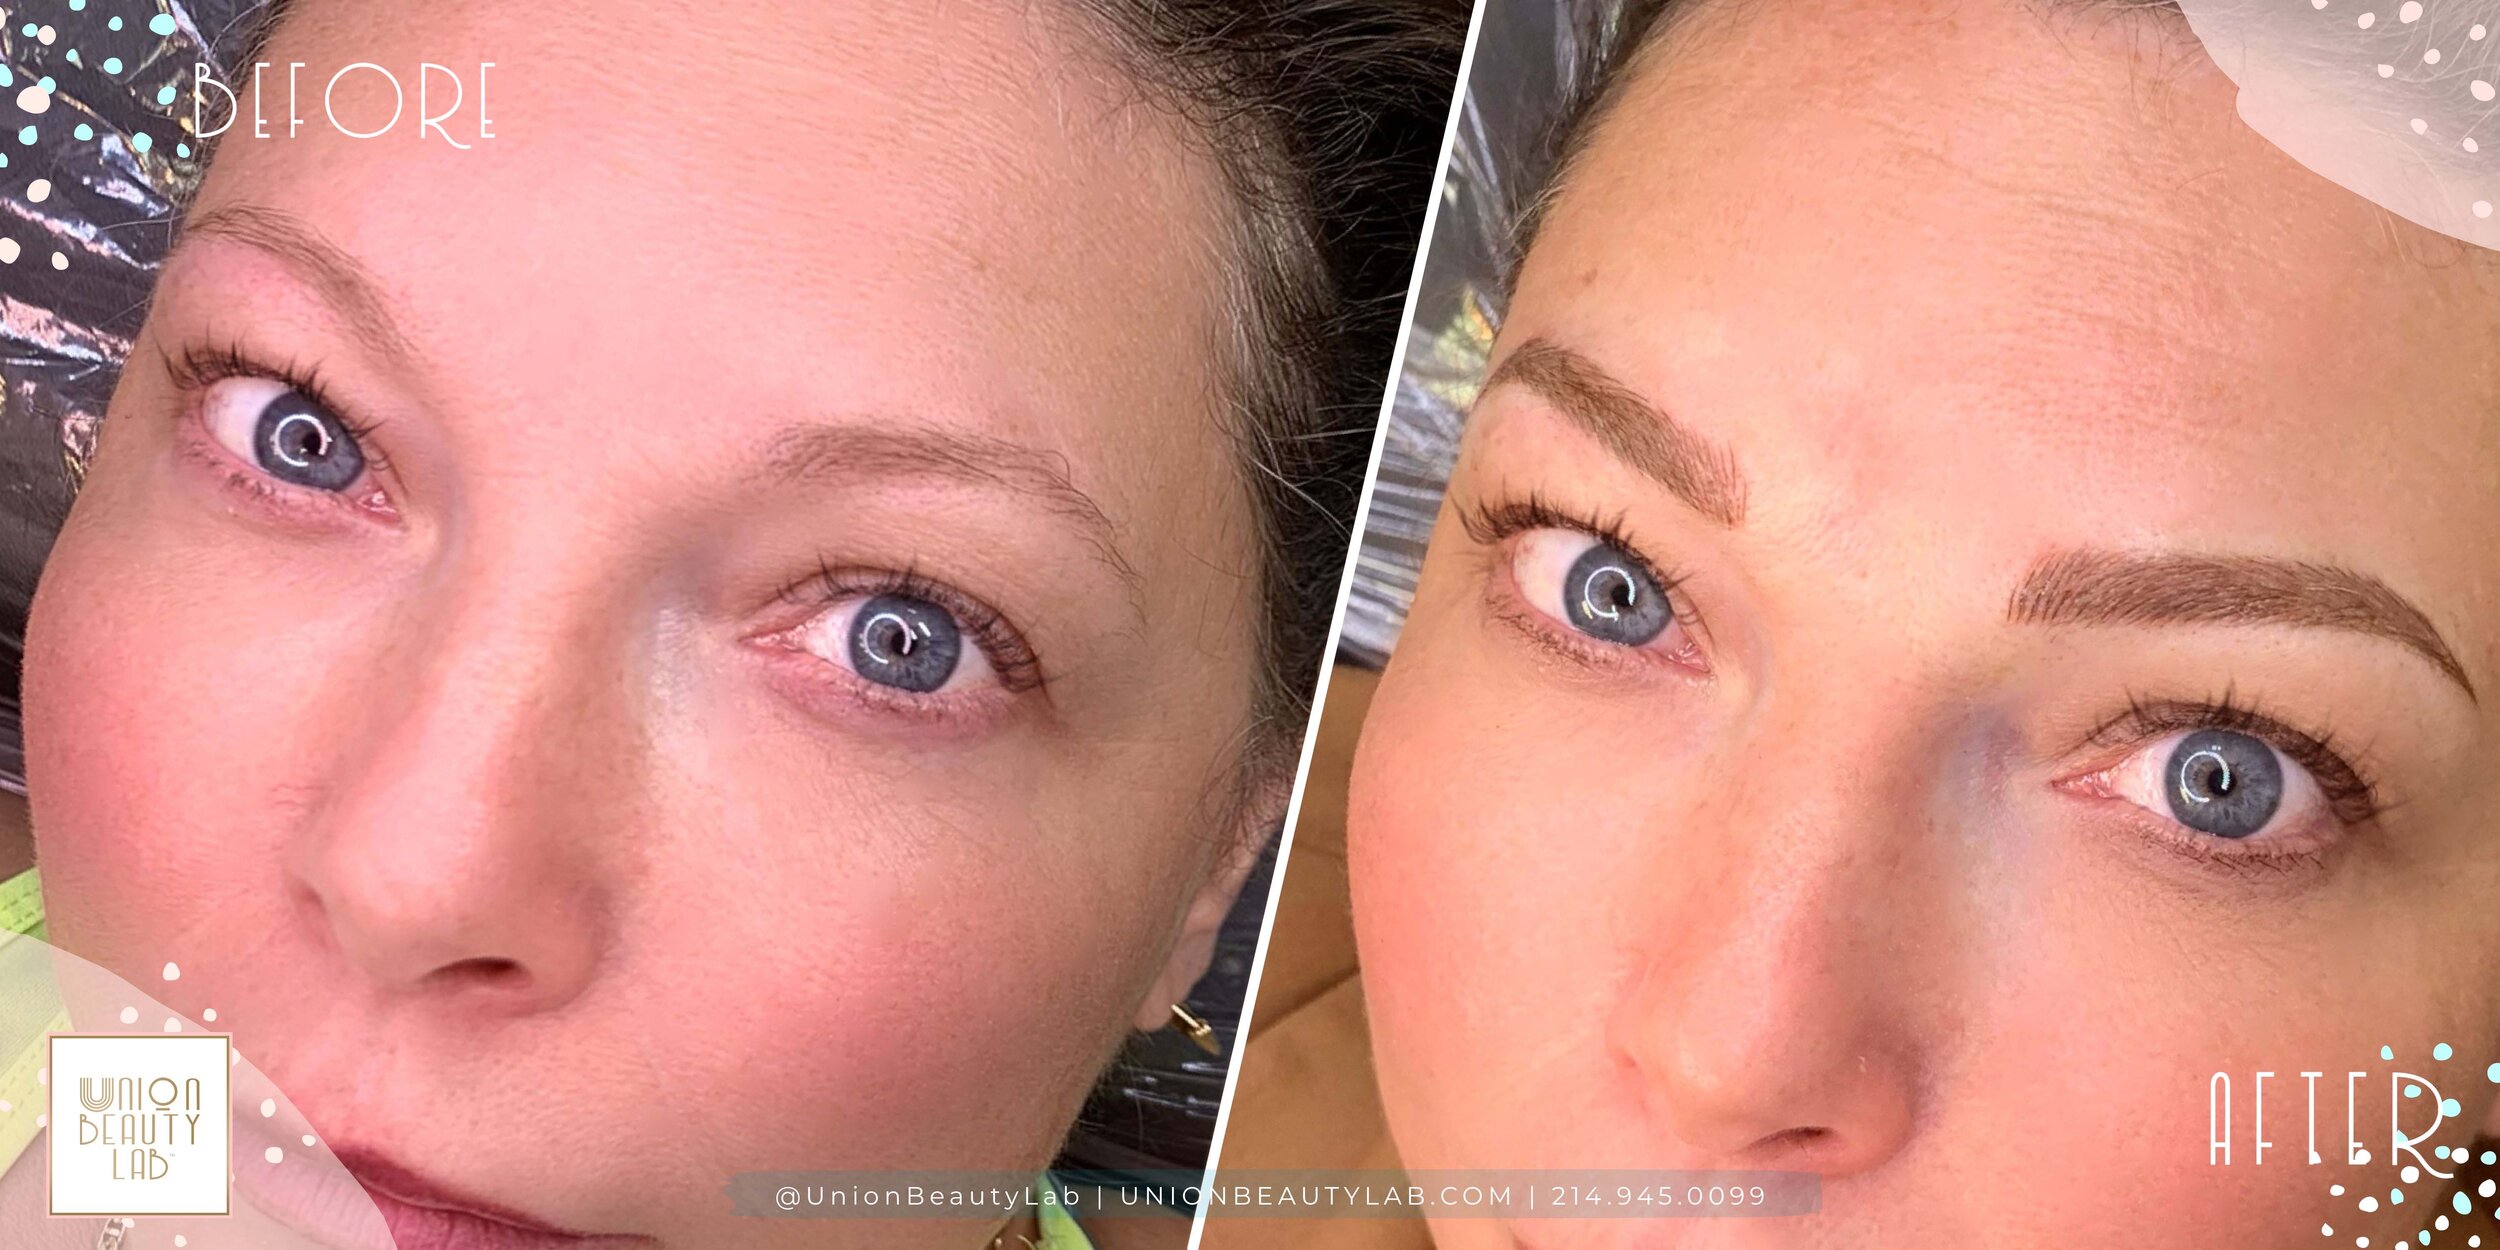 2149450099 Union Beauty Lab Advanced Microblading and Cosmetic Tattooing Dallas Blonde Mature Brows 30 Microblading.jpg